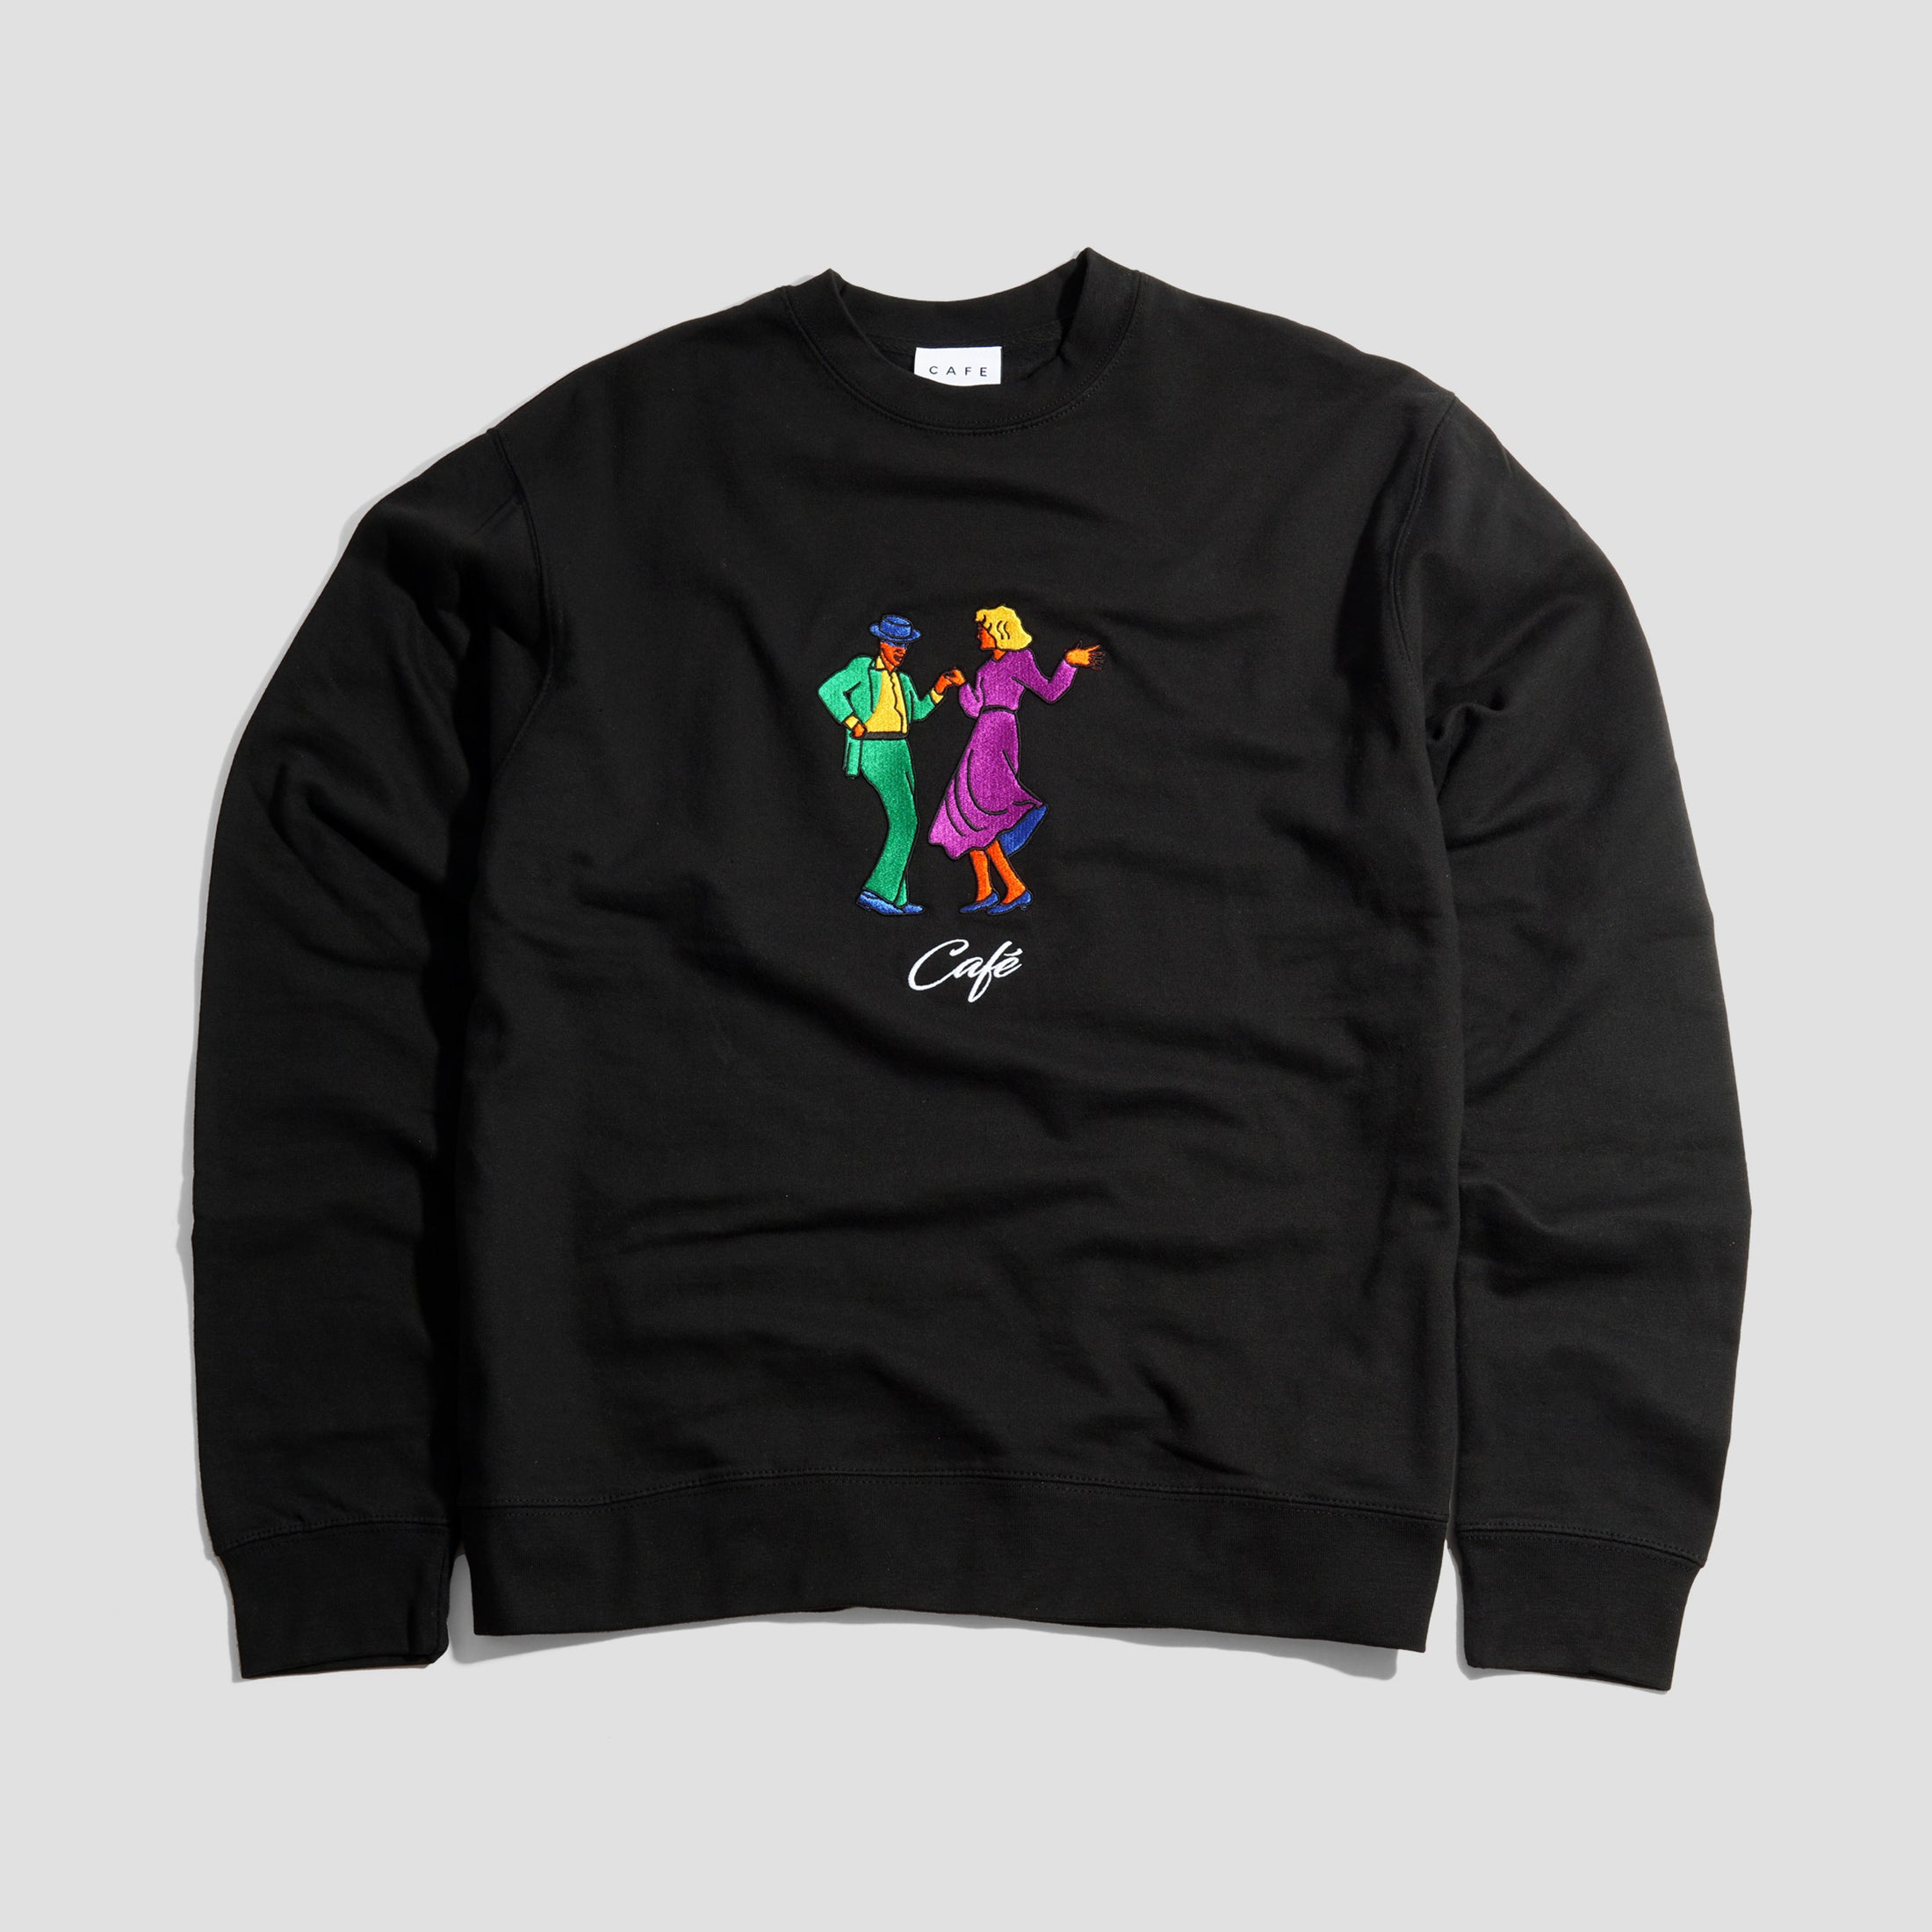 Skateboard Cafe Swing Embroidered Crew Black